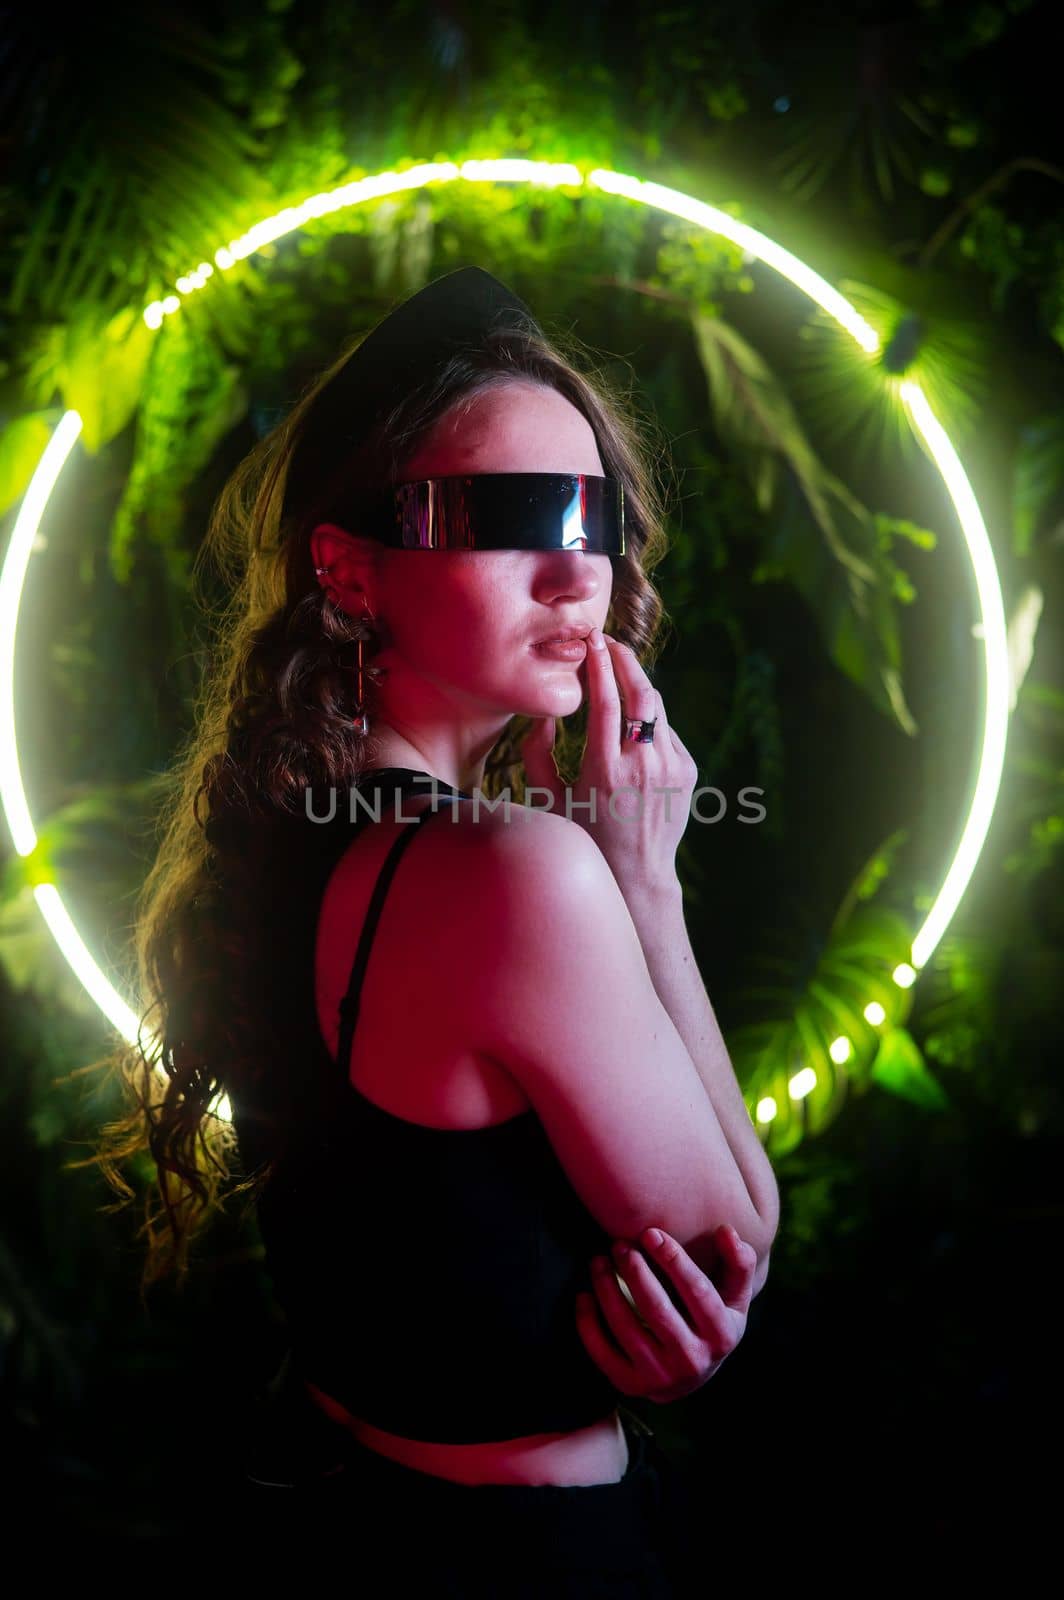 Caucasian woman in panoramic sunglasses against the background of an annular neon lamp in plants. by mrwed54